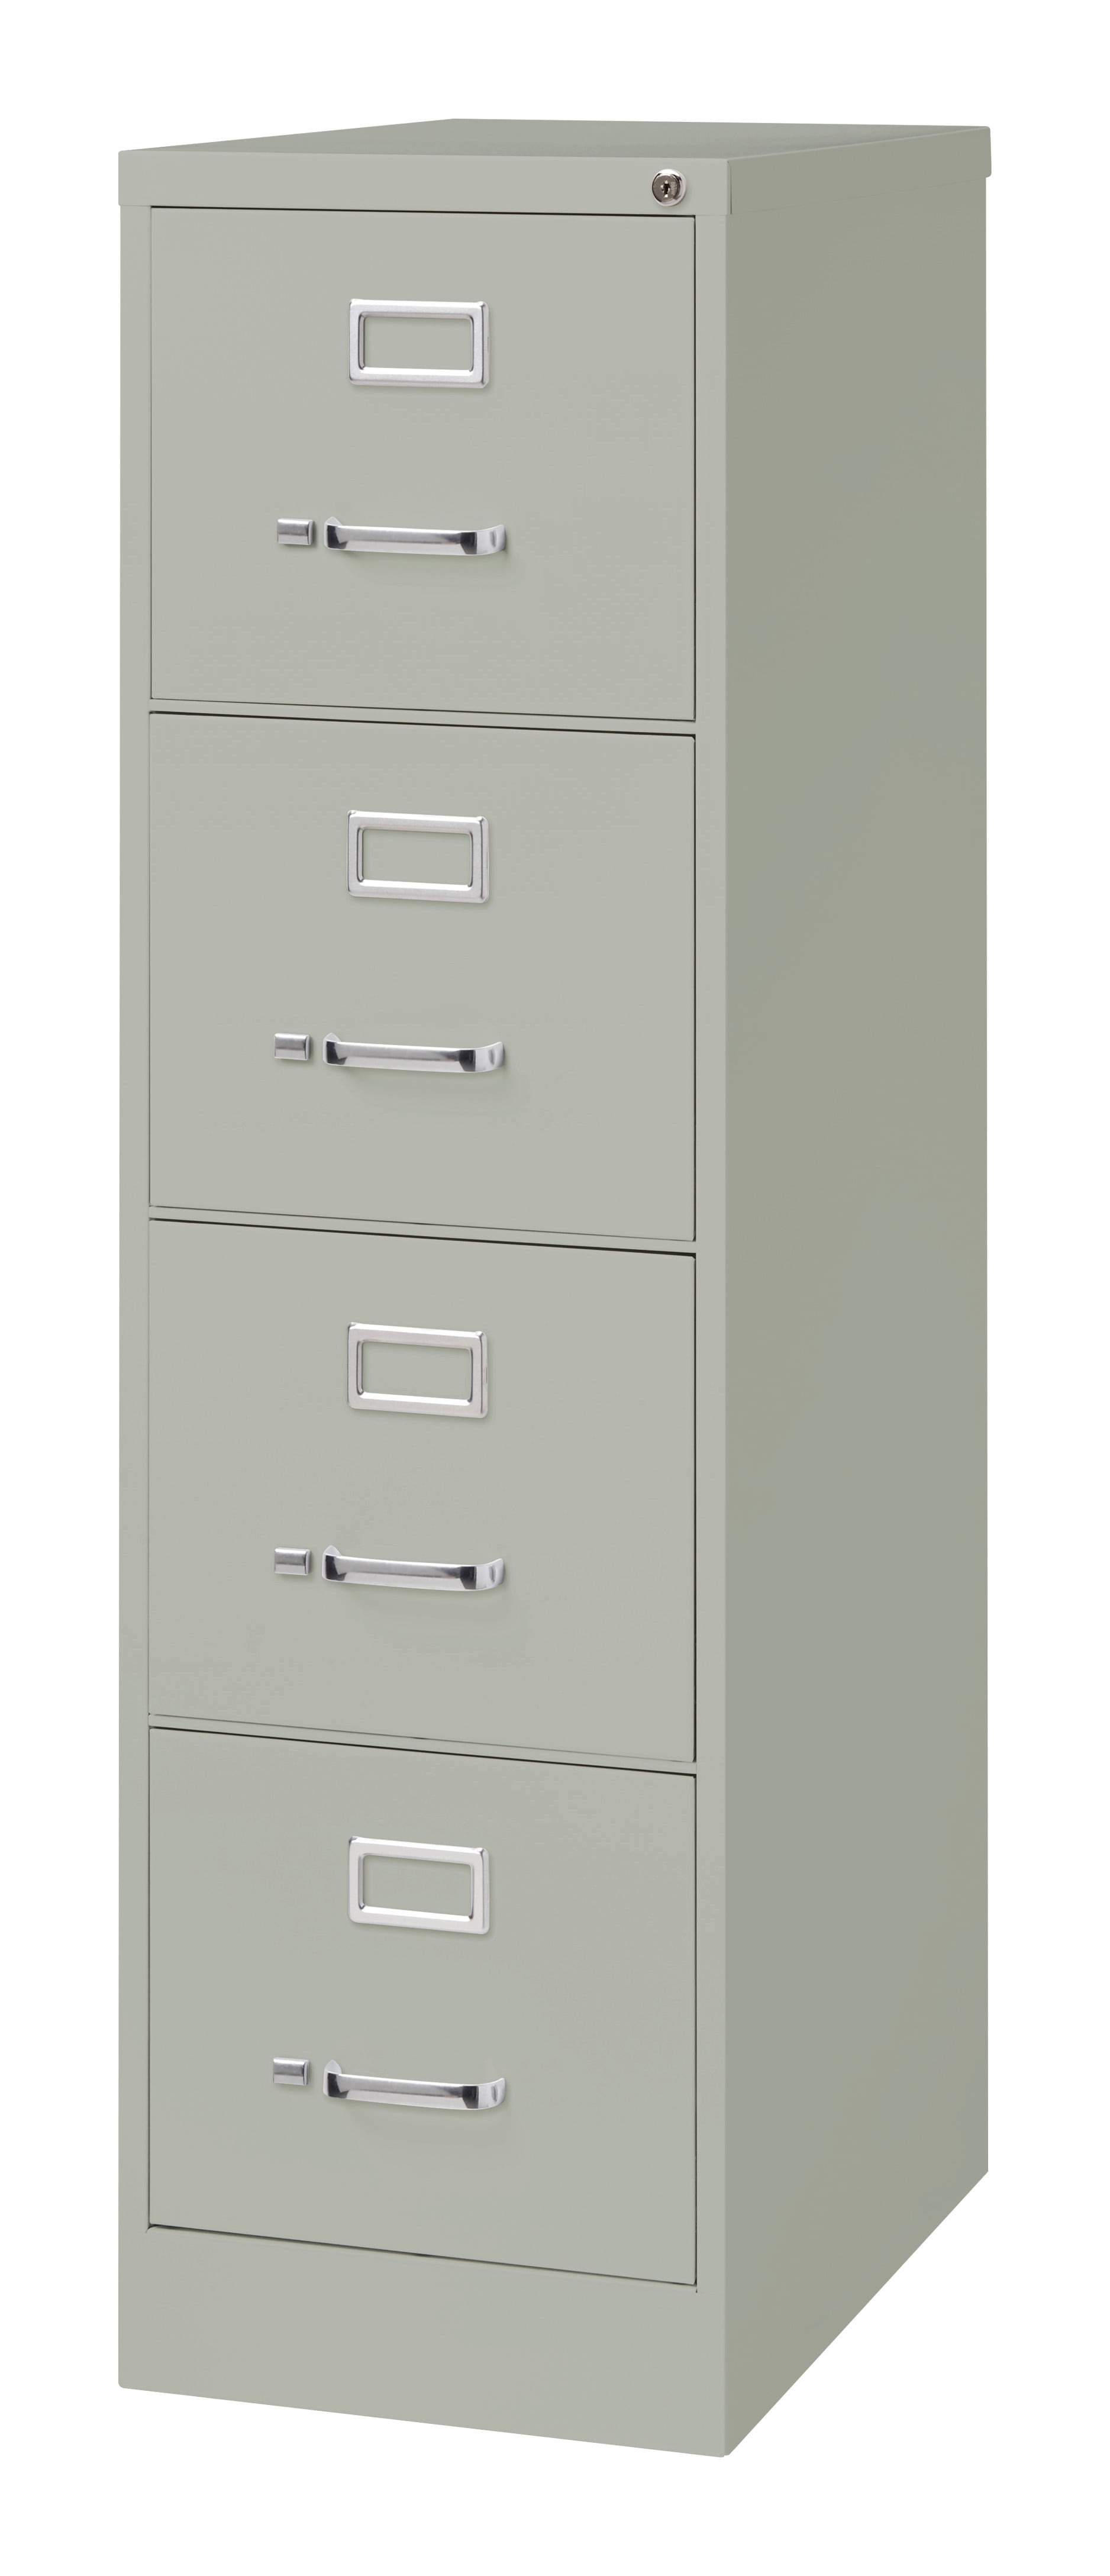 Black 18 by 26-1/2 by 52-Inch Lorell 4-Drawer Vertical File 